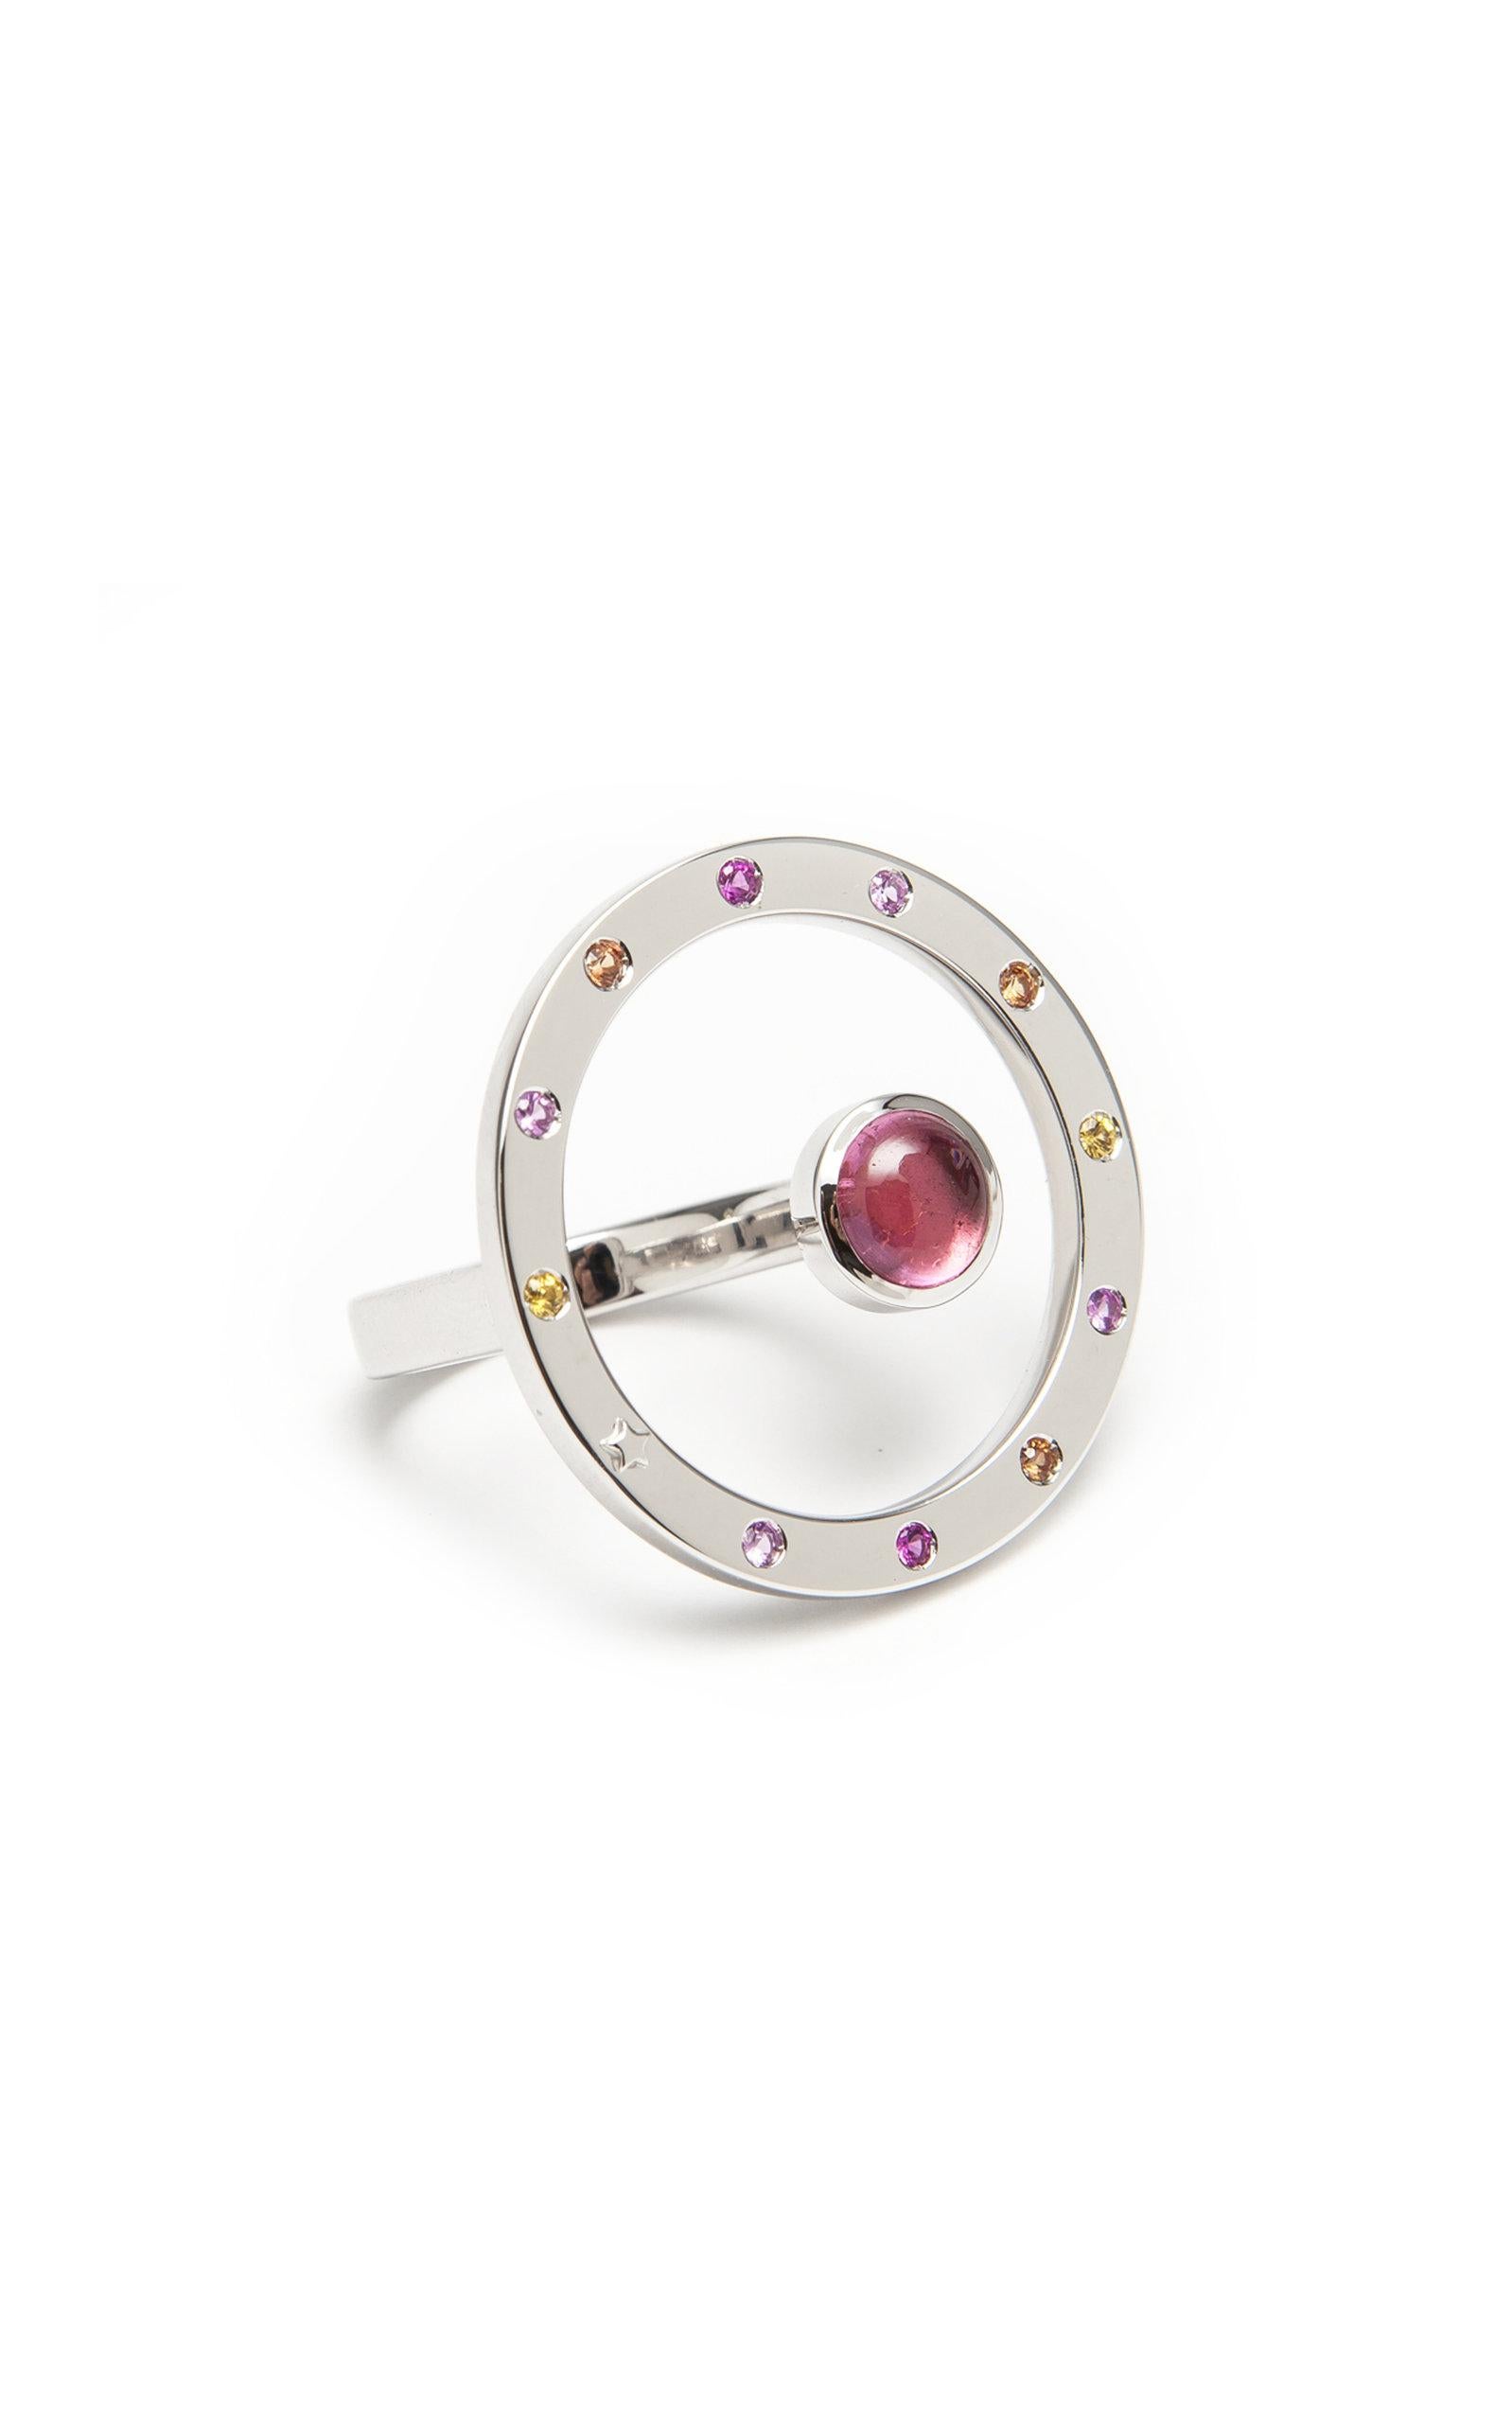 nspired by the concept of time, Anna Maccieri Rossi's 'ORA Ring' features a circular silhouette with tourmaline cabochon at center. The multicolored sapphires and a gold star at 8 o'clock around the rim mark each hour of the day.
PRODUCT